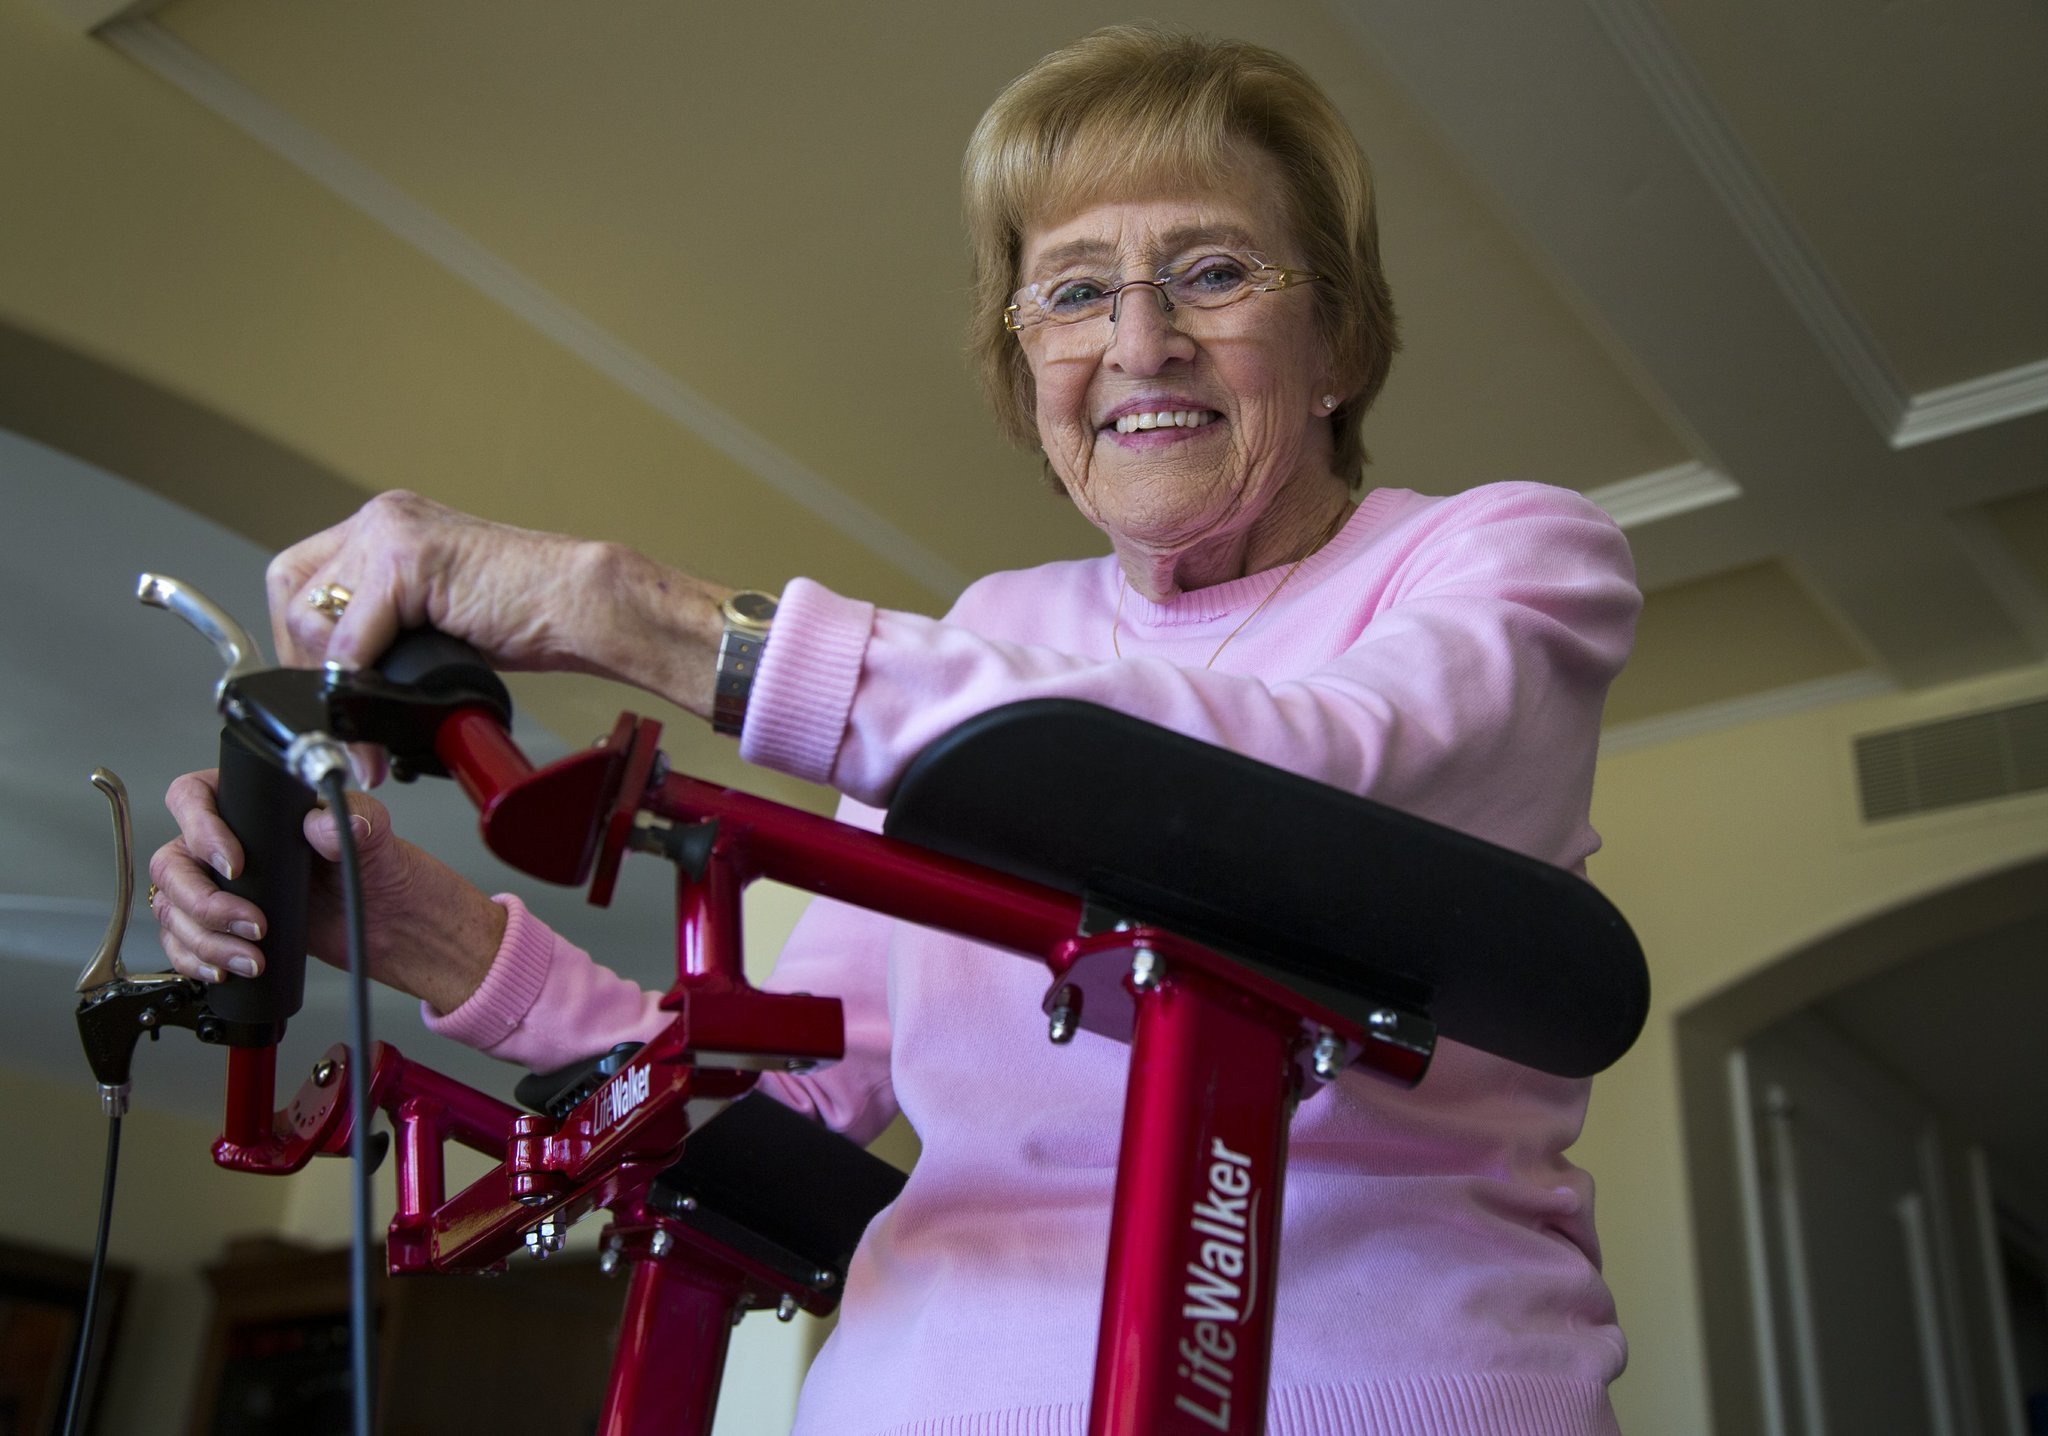 Making strides with an upright walker - The San Diego Union-Tribune